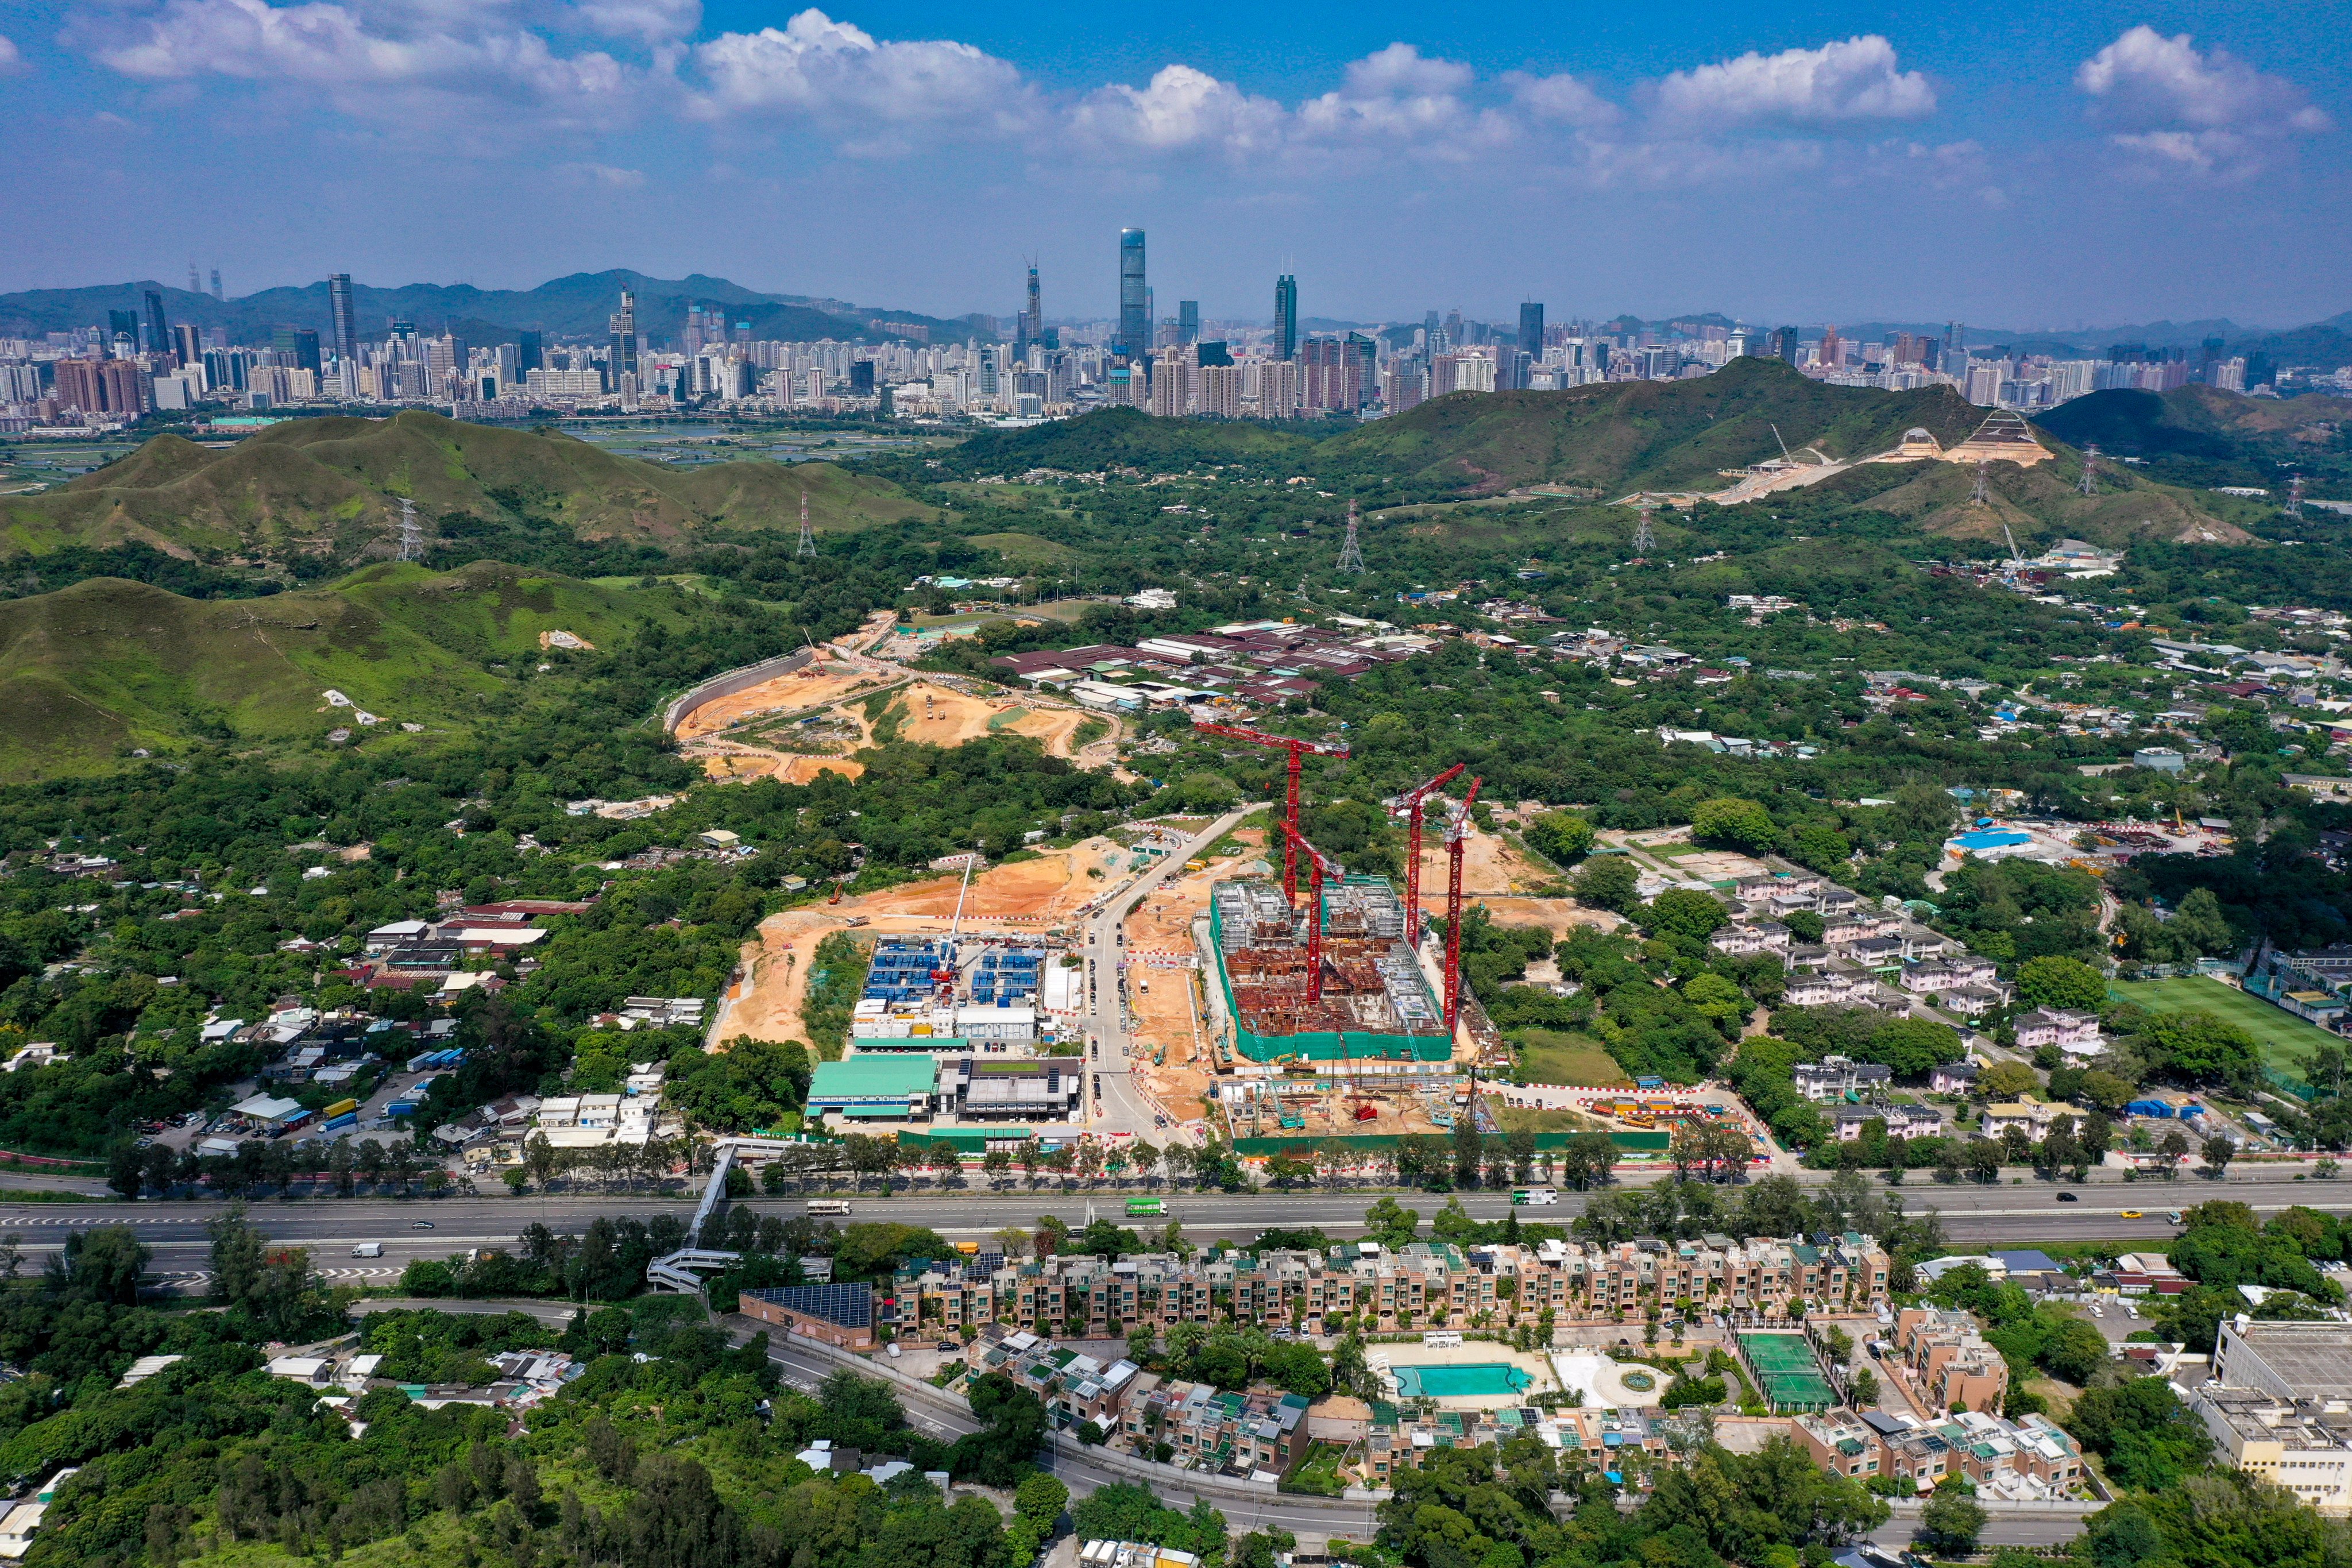 A view of the border area where the Northern Metropolis will take shape. Photo: Winson Wong